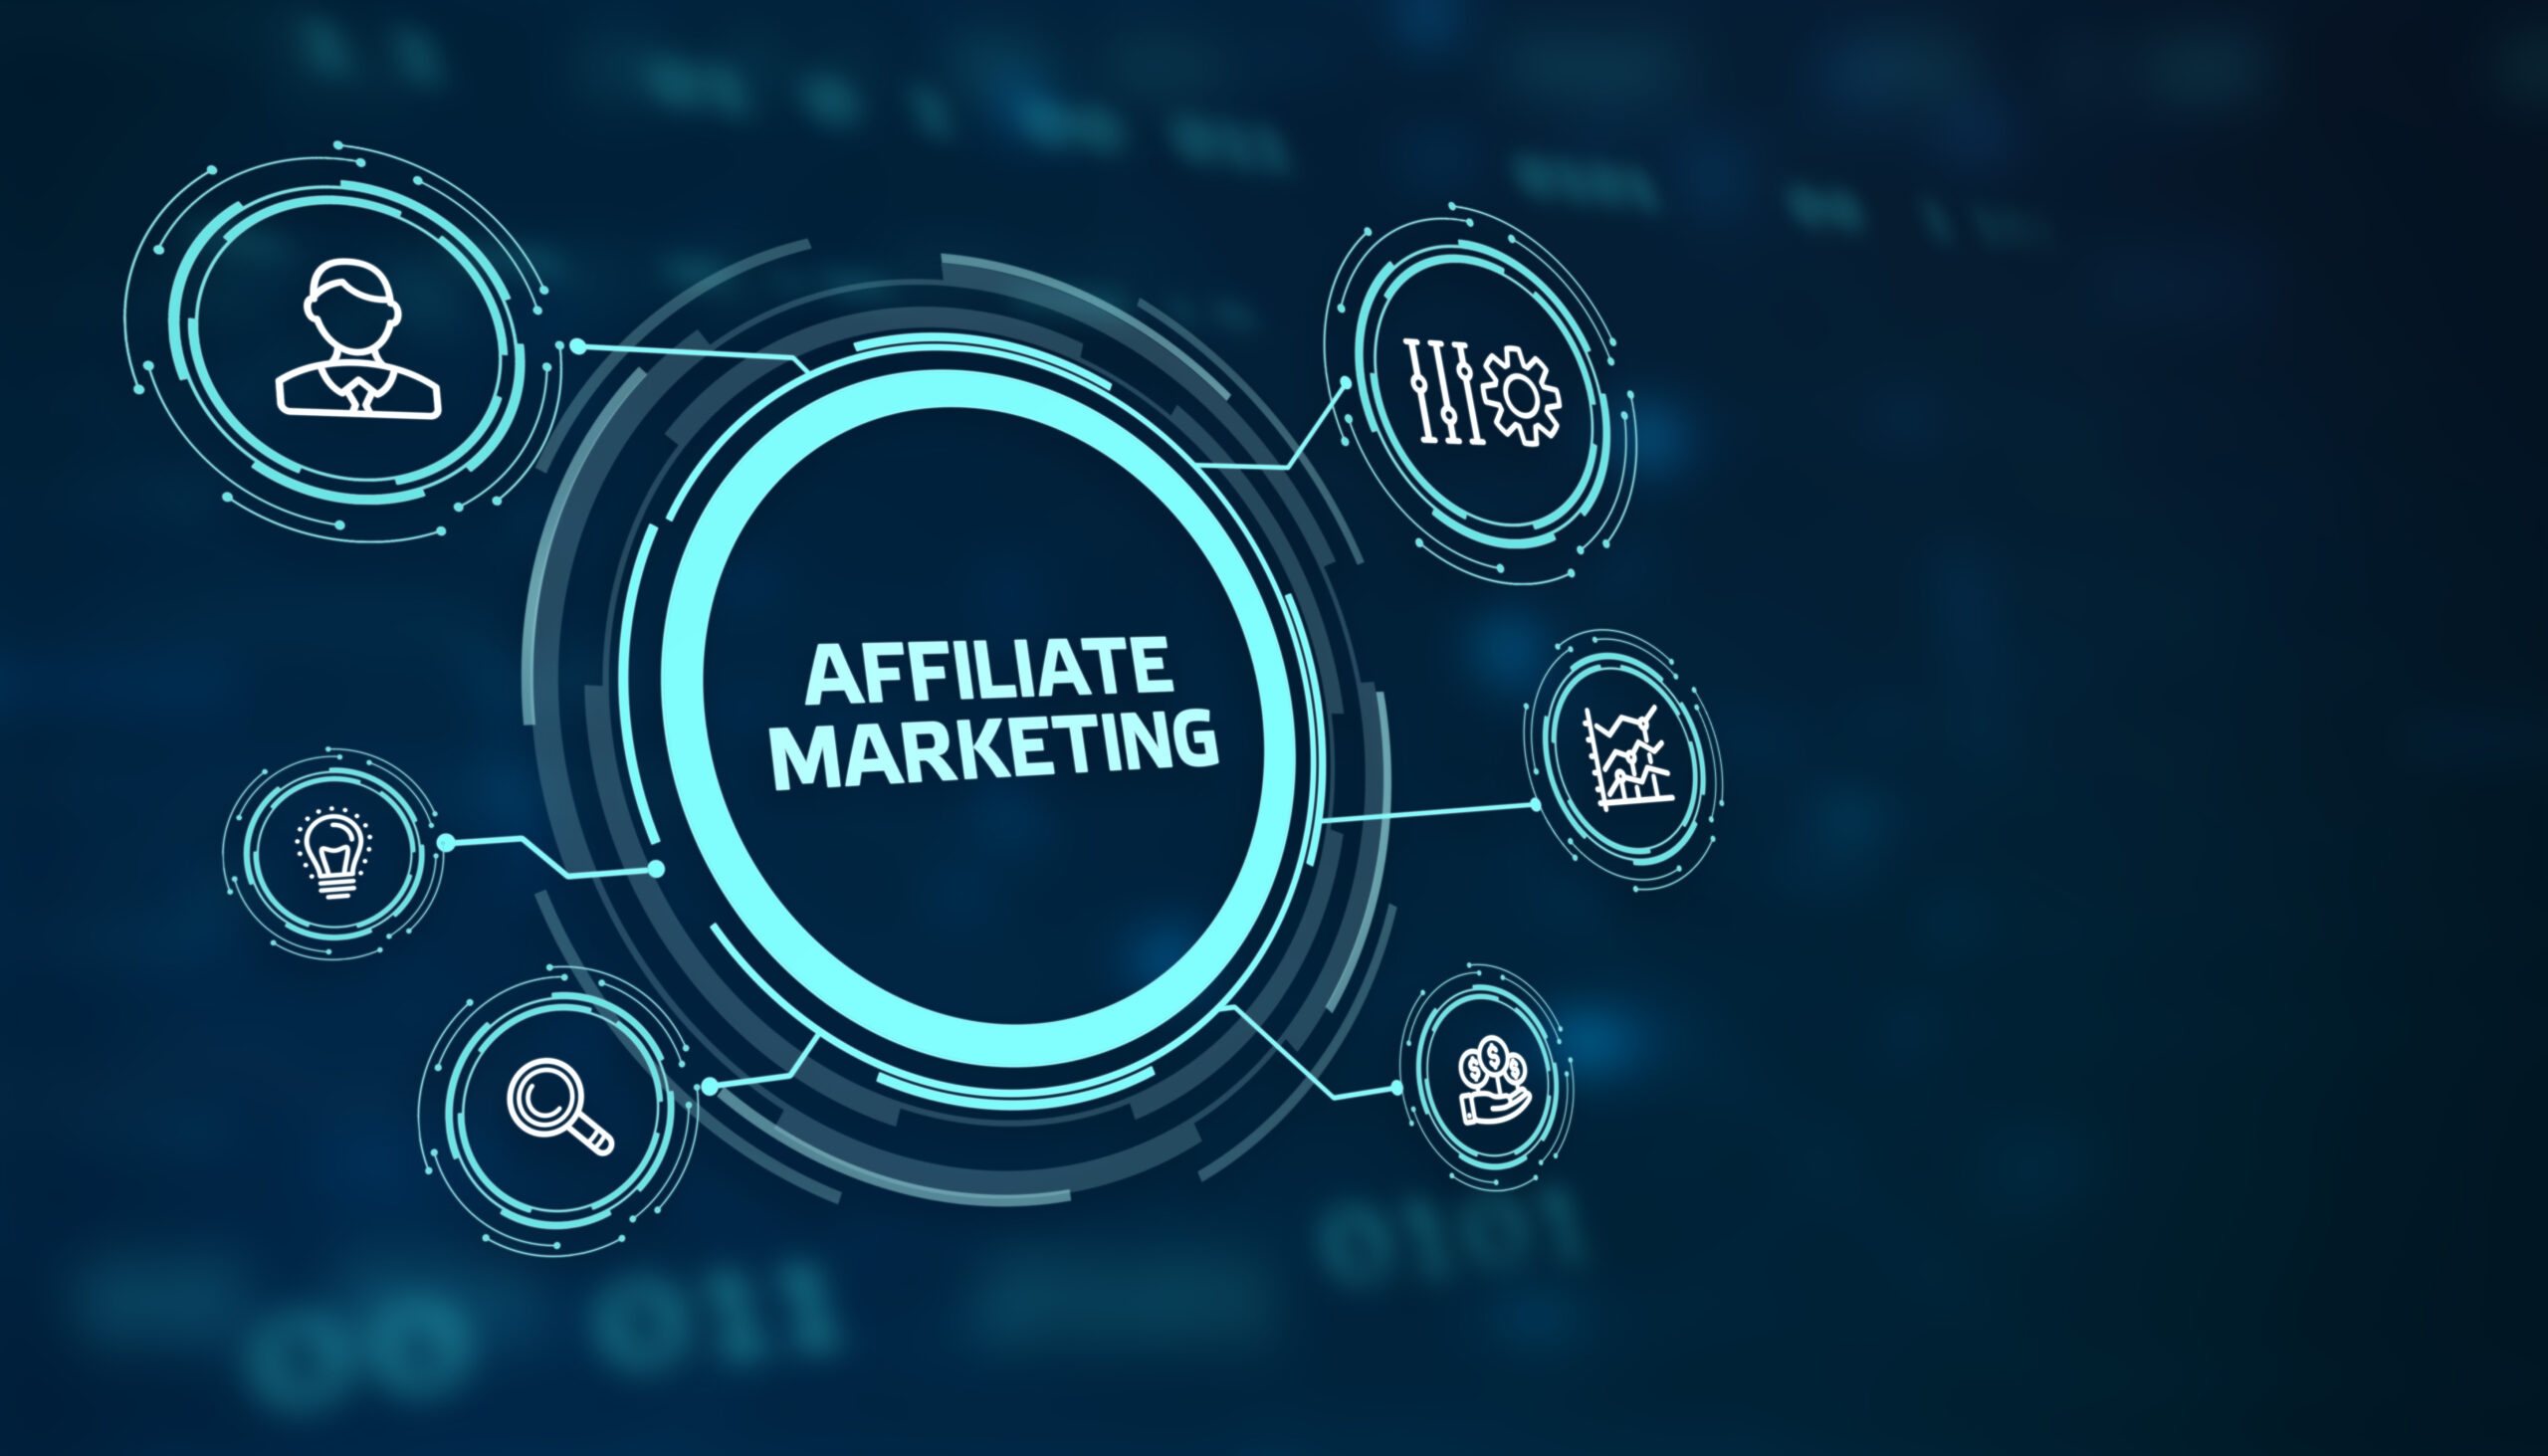 ShareASale Review: How to Become an Affiliate